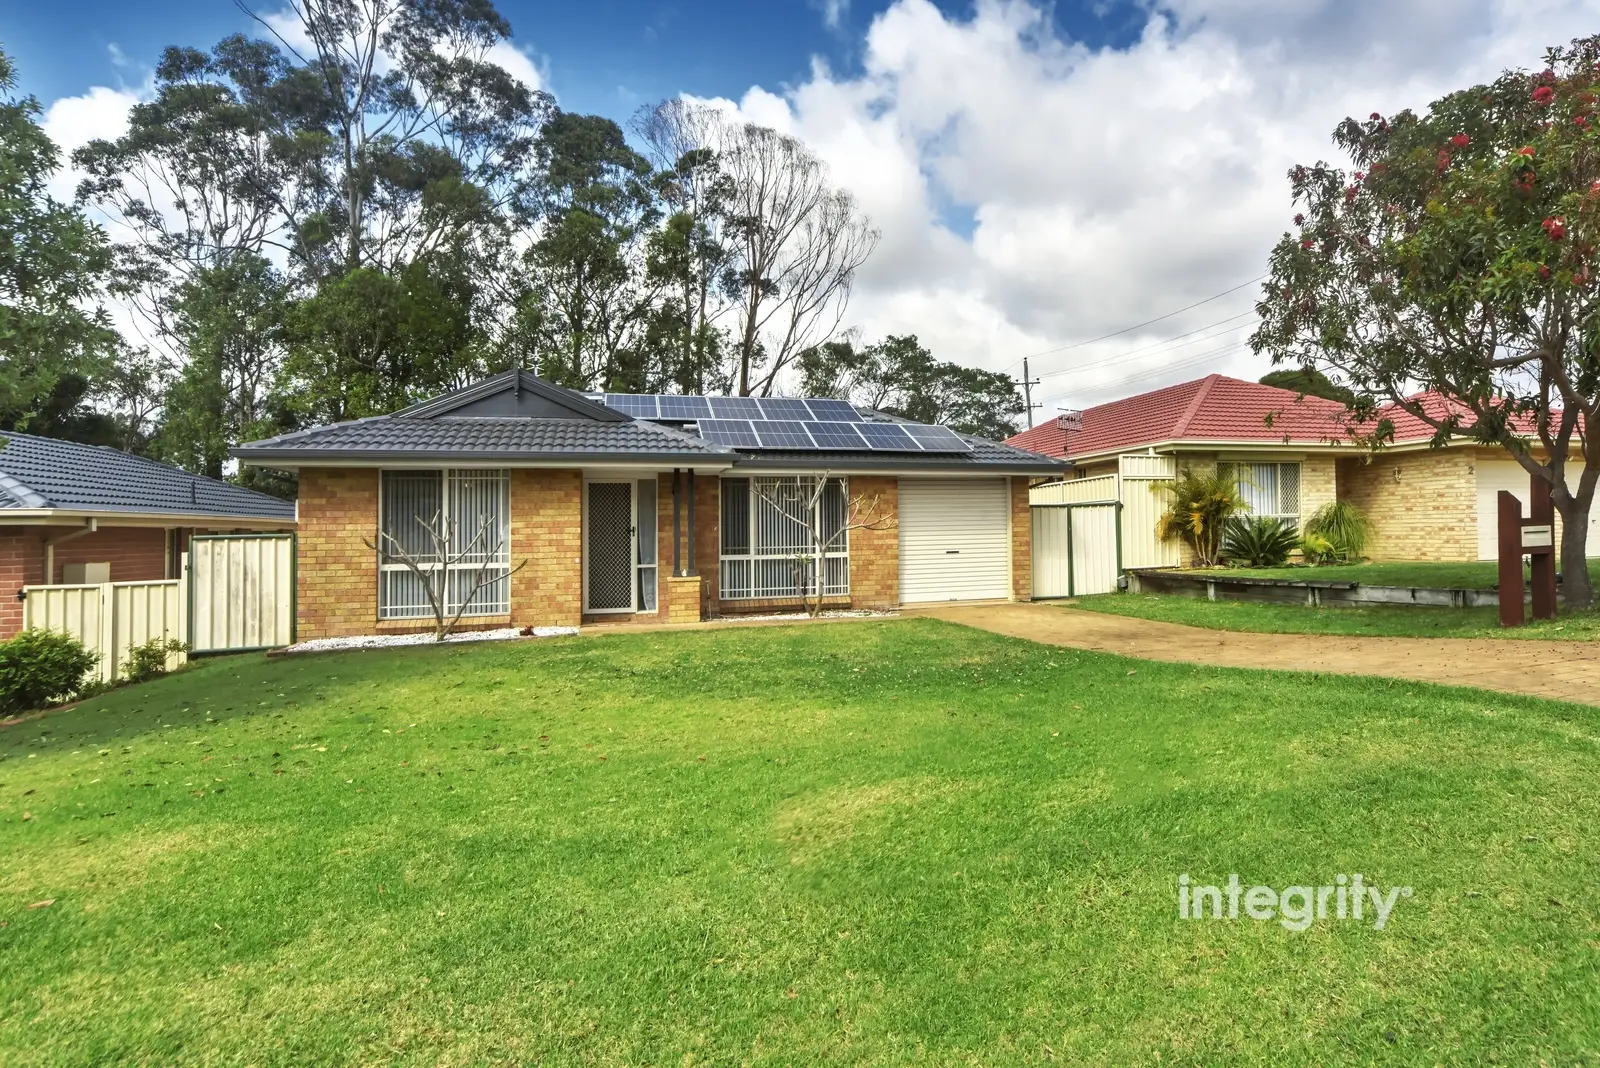 4 Olympic Drive, West Nowra For Sale by Integrity Real Estate - image 3